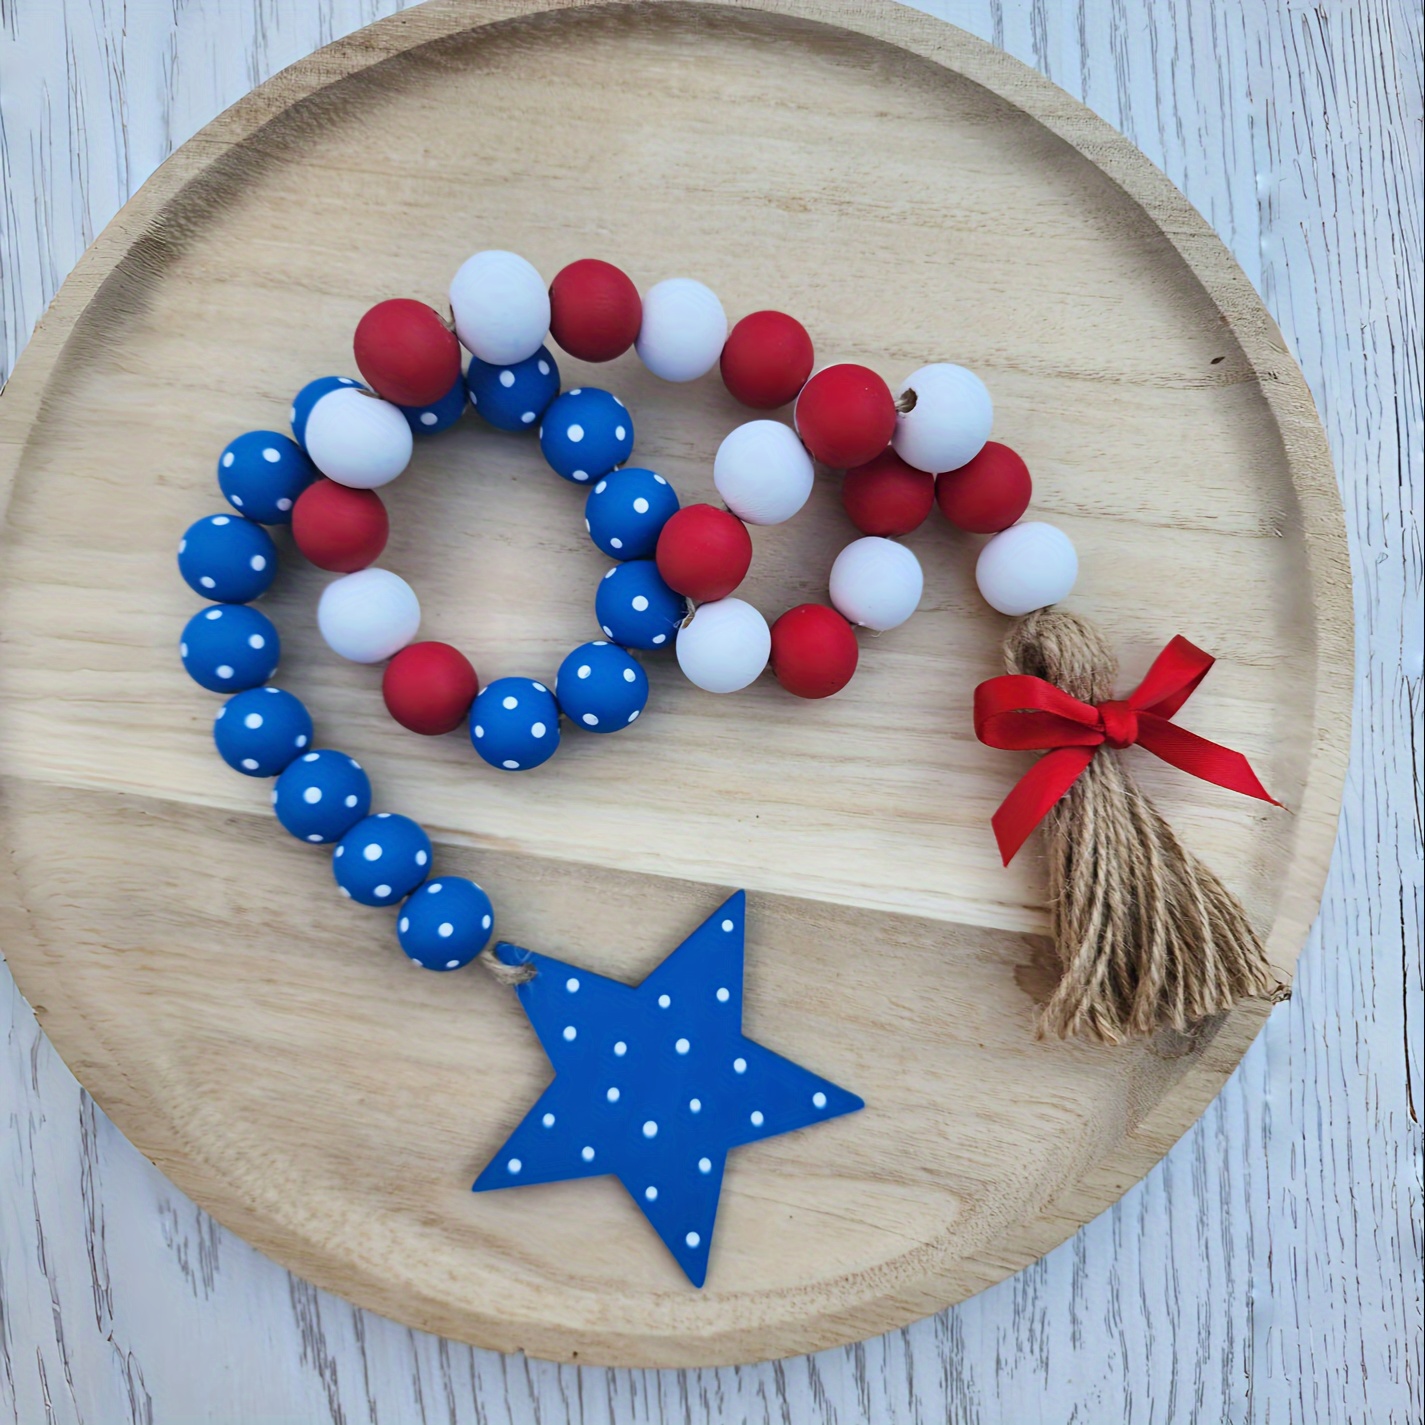 

1pc, Wooden Farmhouse Wreath With Layered Trays Of Red, White, And Blue Beads On July 4th, A Decorative Ornament For Independence Day.